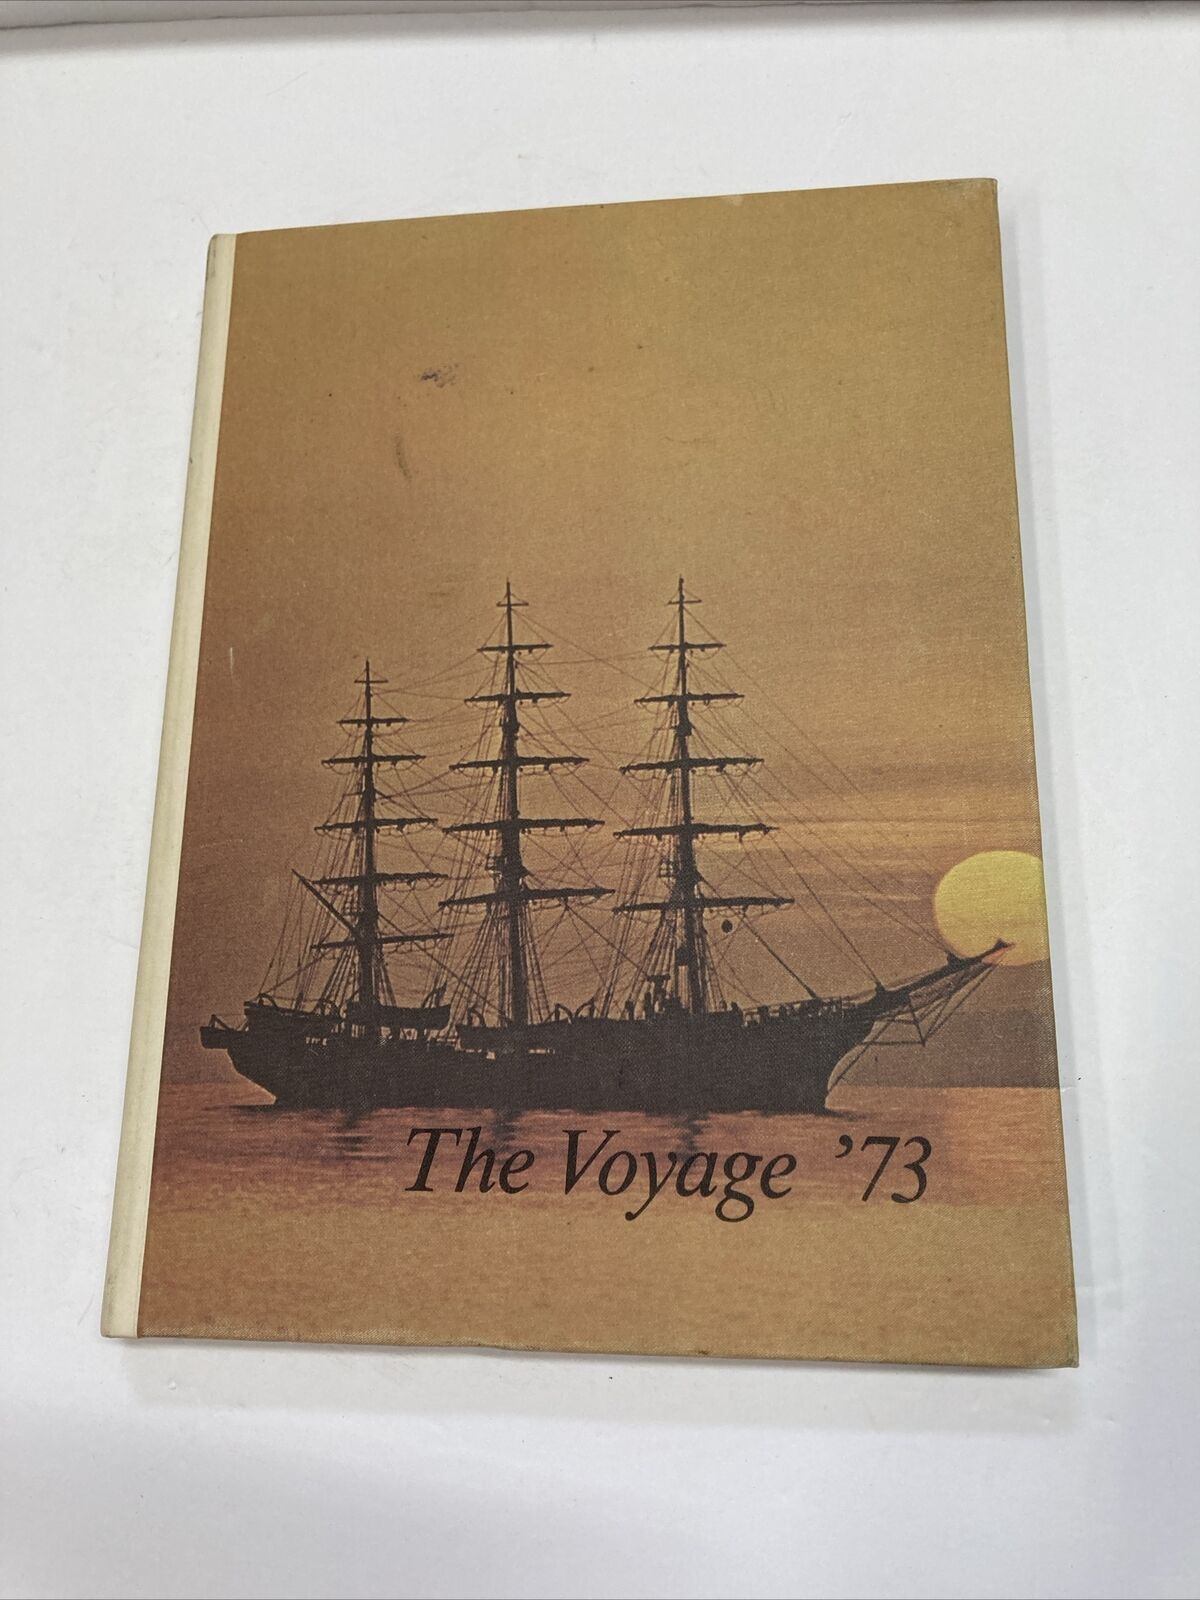 1973 St Mary High School Paducah KY Vikings The Voyage Yearbook Annual Hardcover